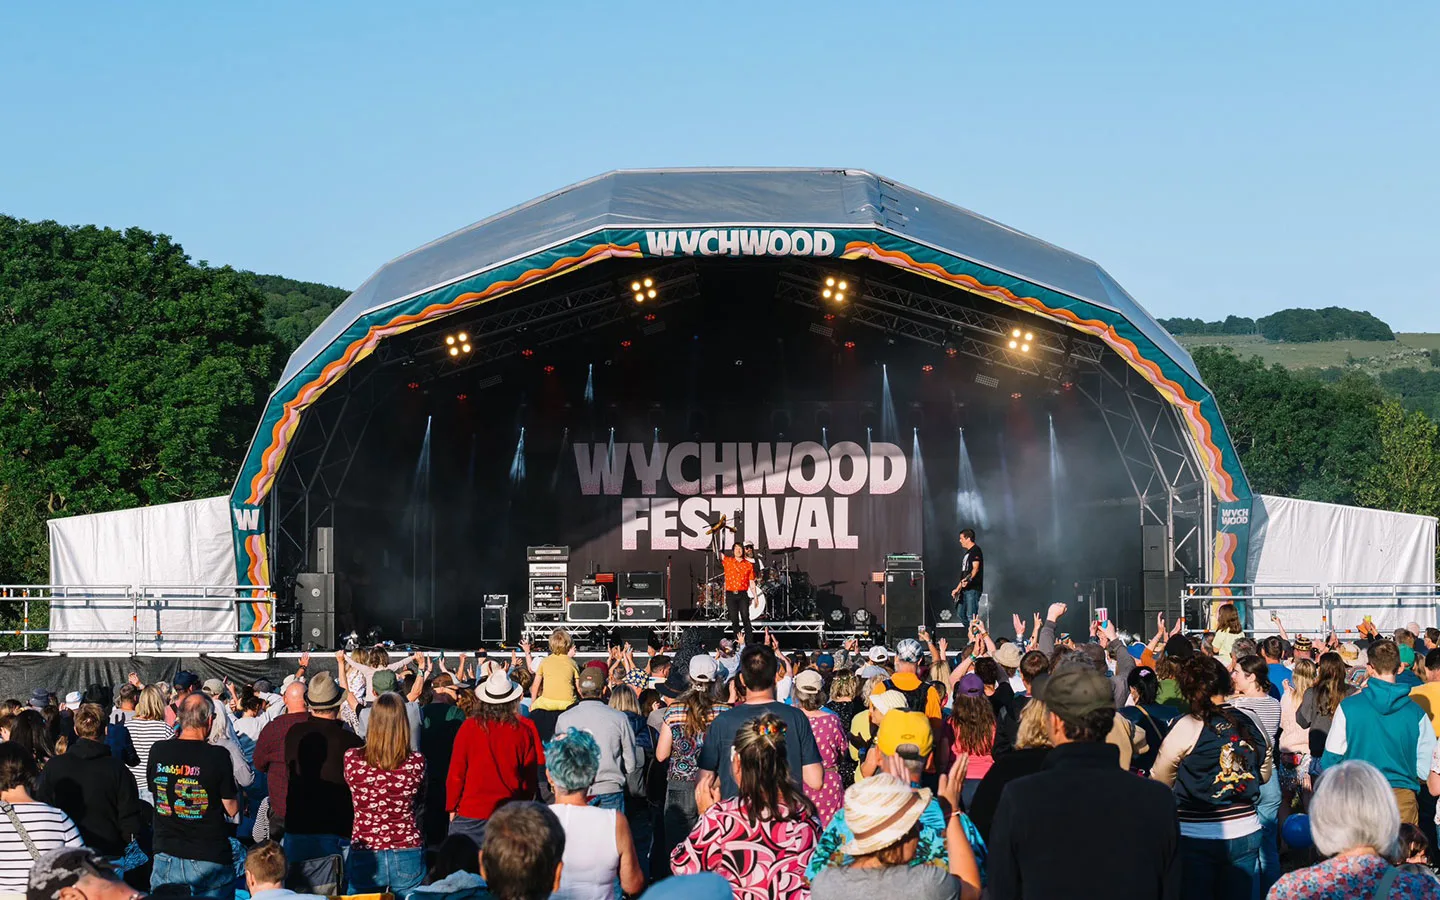 Wychwood – one of the top music festivals in the Cotswolds